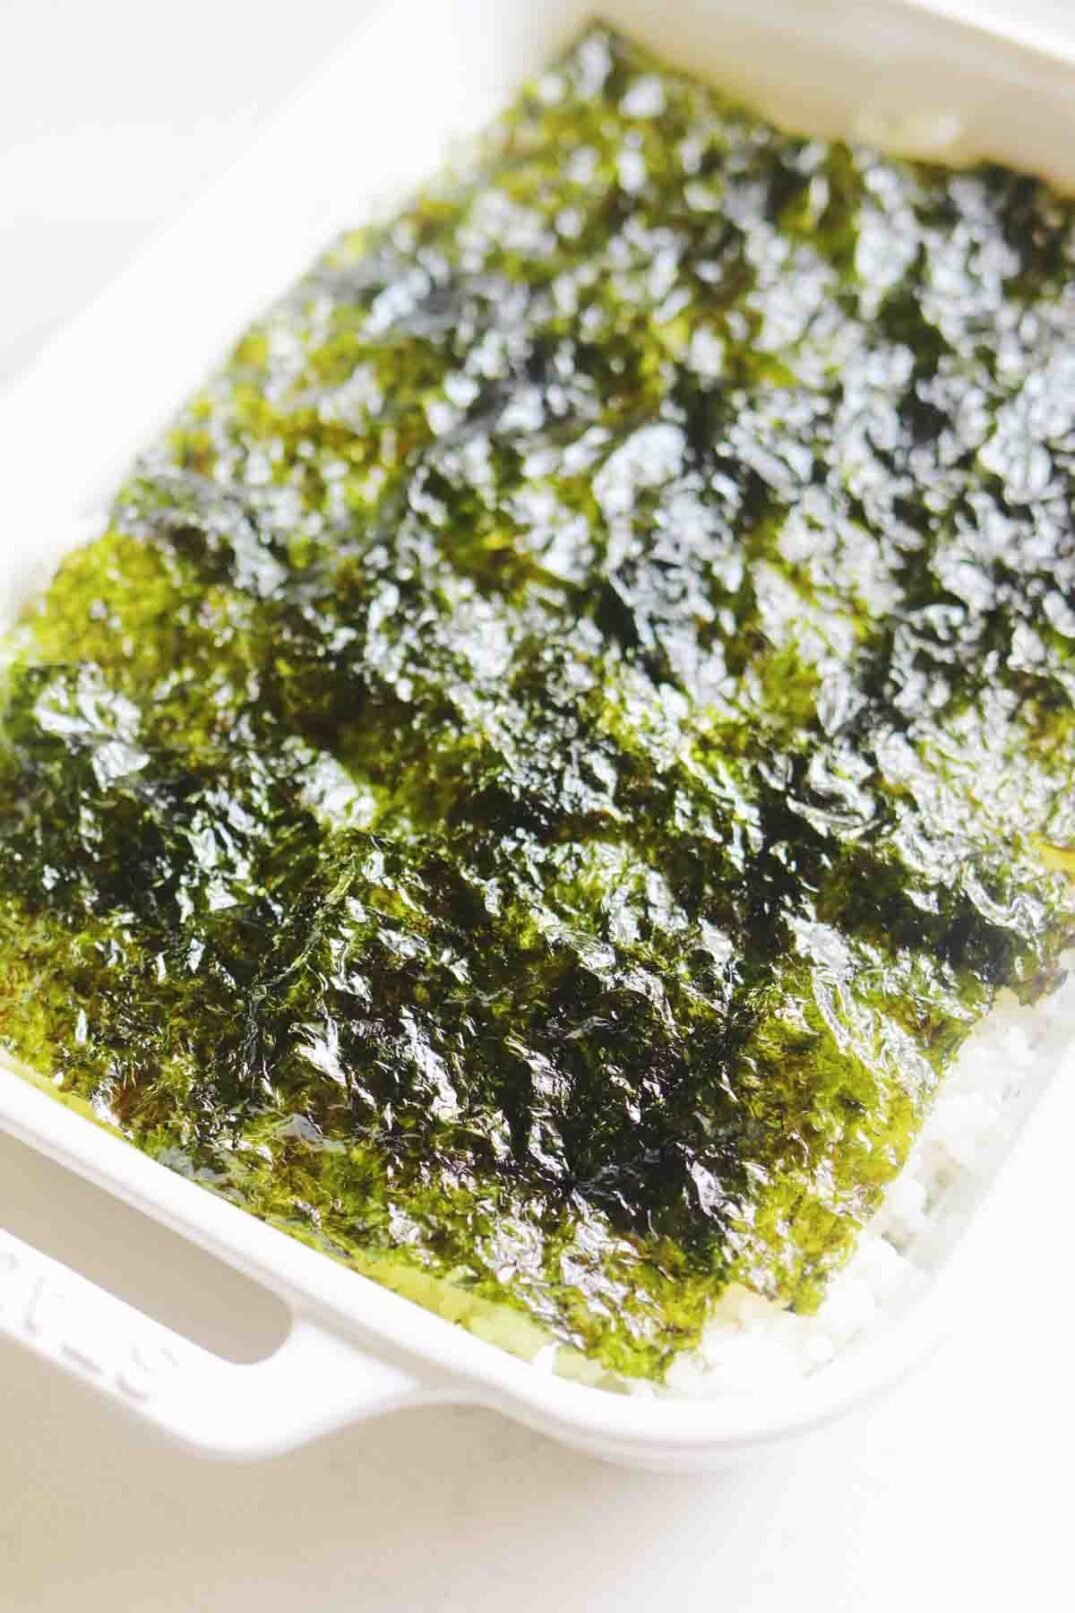 nori sheets on top of sticky sushi rice in a white staub baking dish.